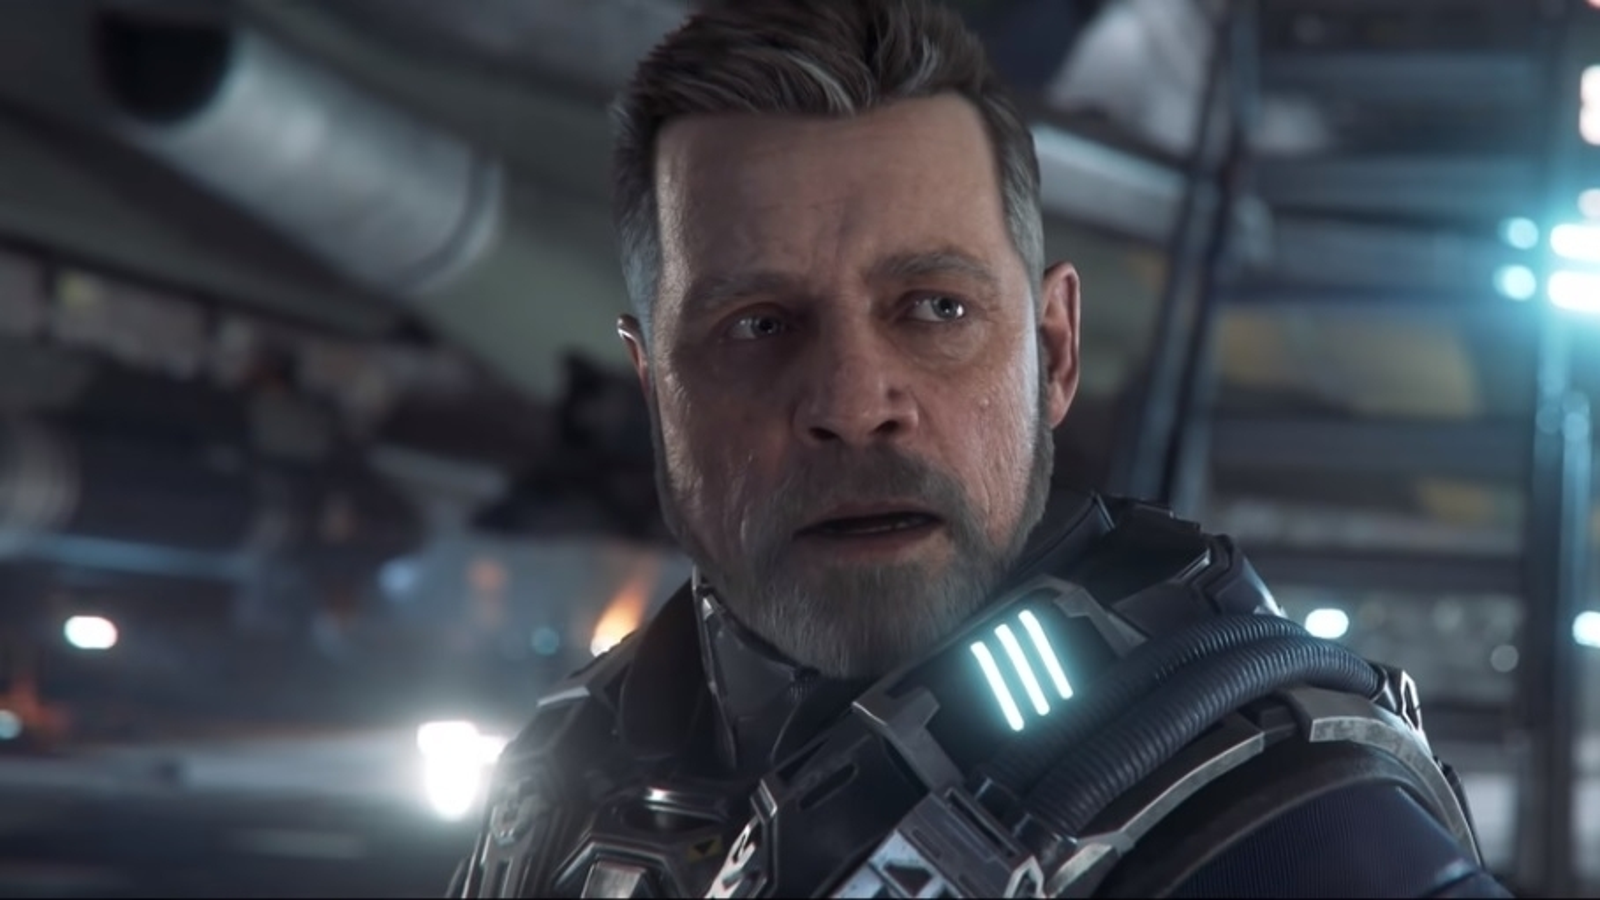 Only kidding, downloading Star Citizen on xbox & ps5 isn't possible. L